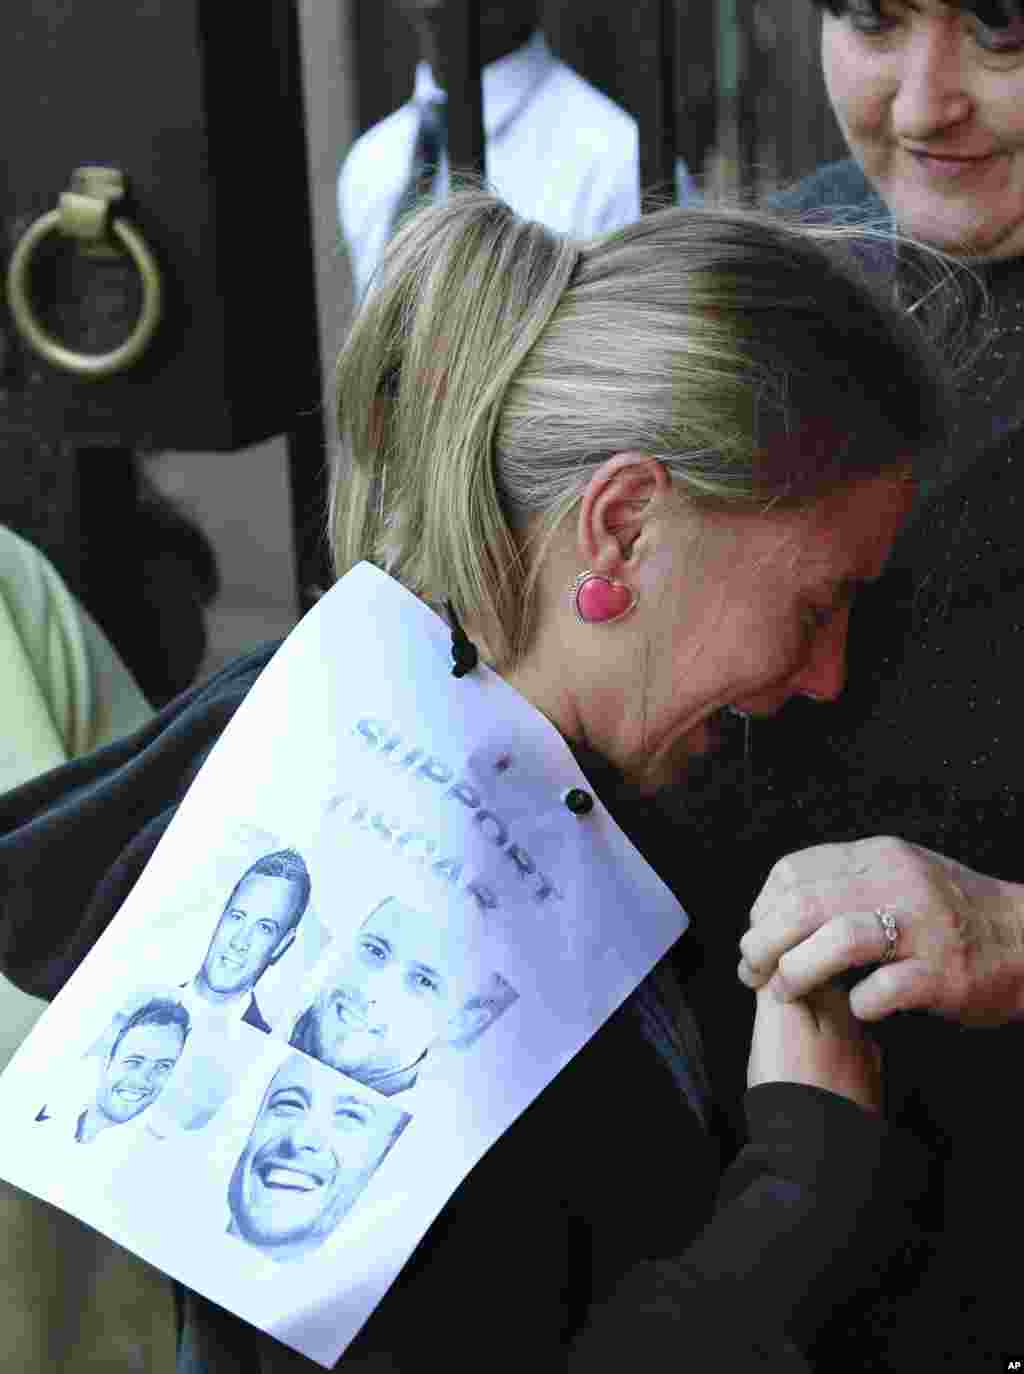 Kayla Nolan is comforted by her mother, Lynette Nolan, after meeting Oscar Pistorius upon his arrival at the high court in Pretoria, May 5, 2014.